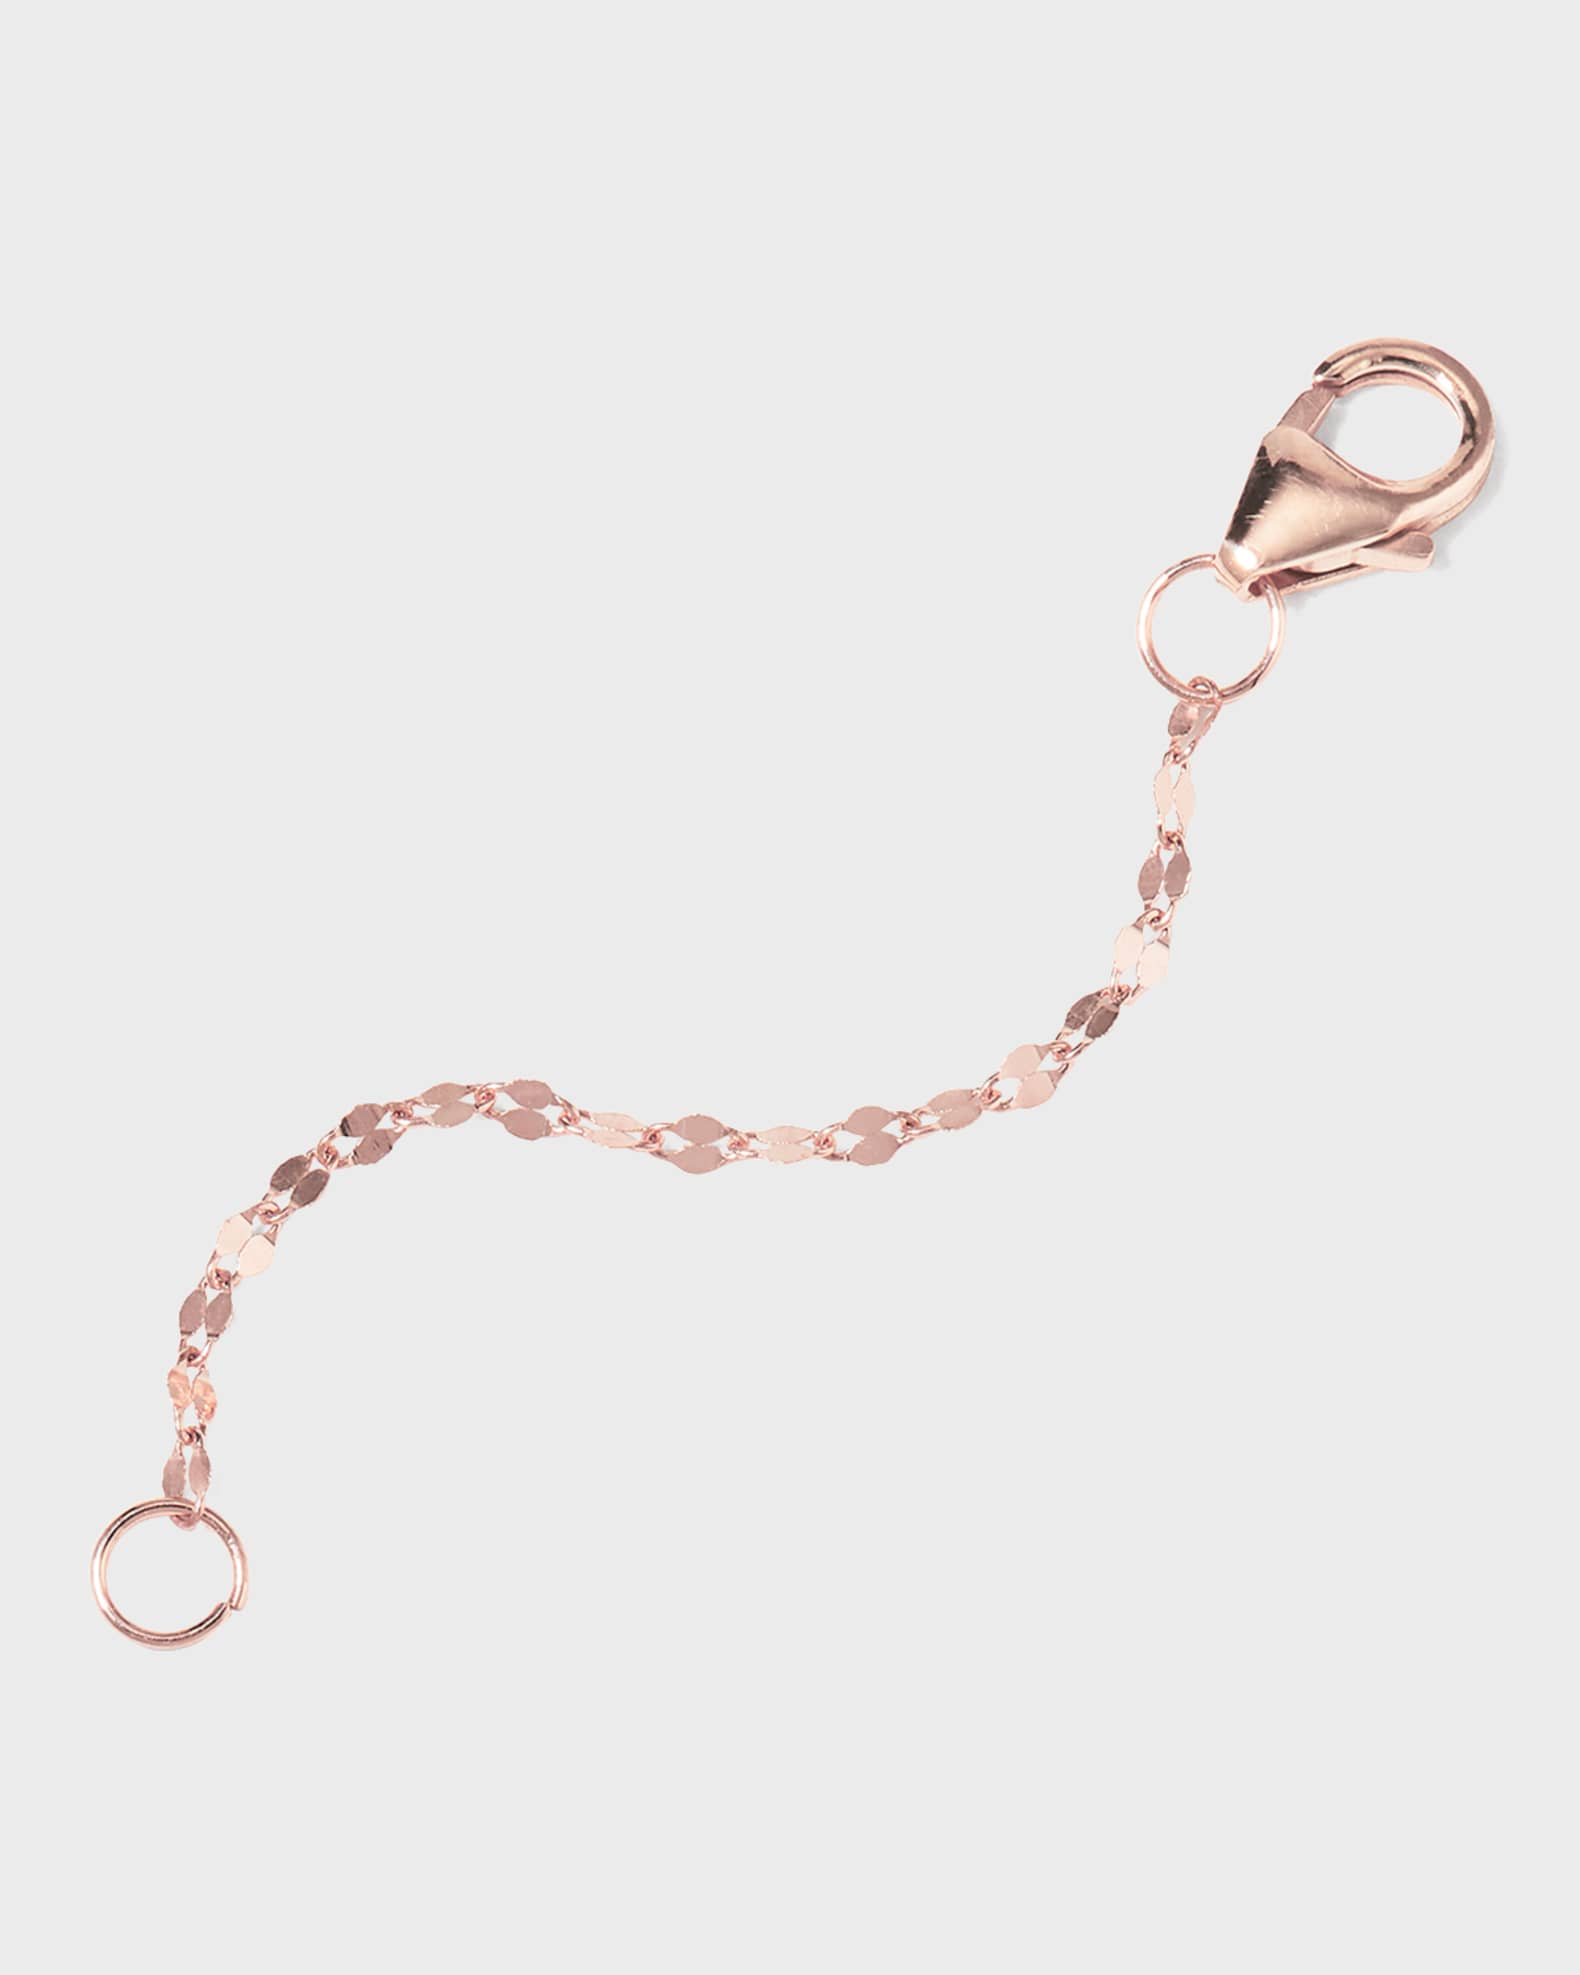 Body Chain or Necklace Extender, Jewelry Extension Rose Gold